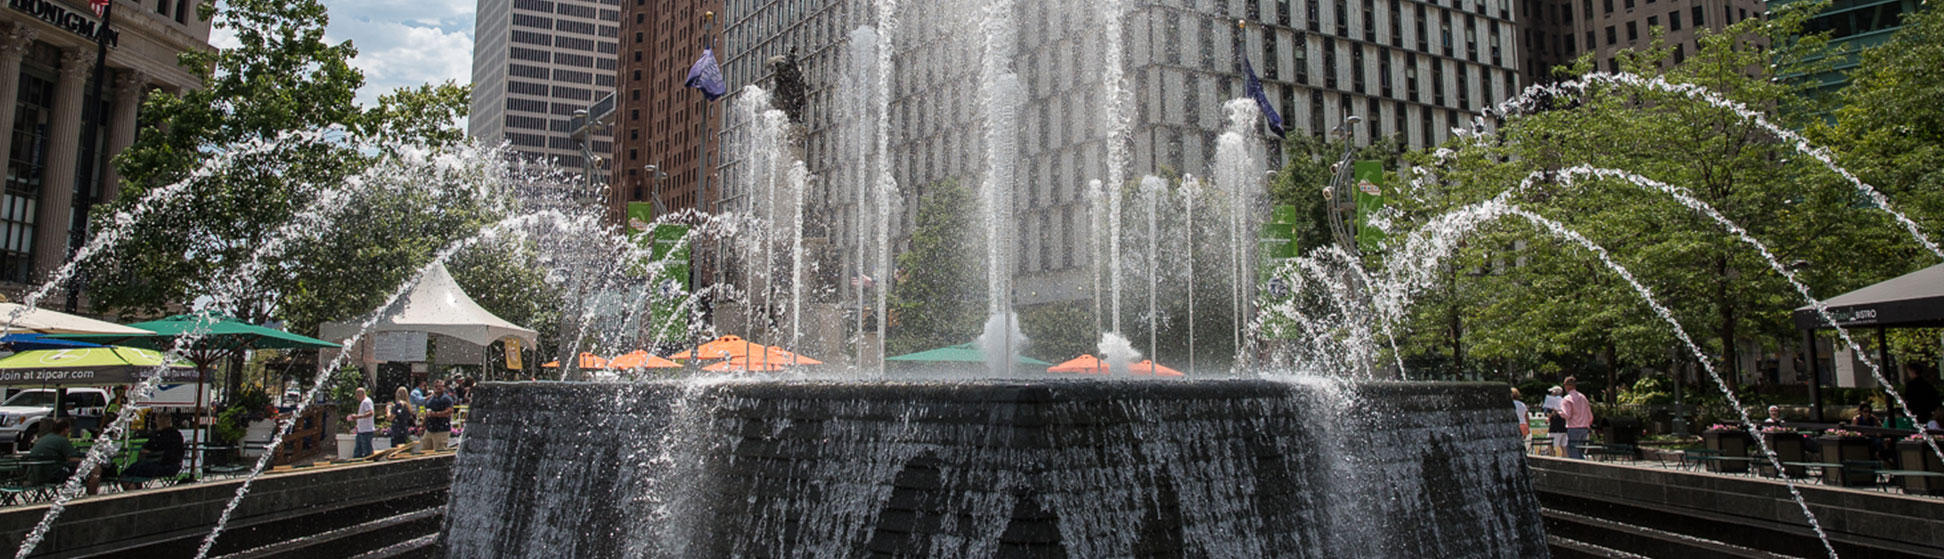 Woodward Fountain (image from Campus Martius Park)